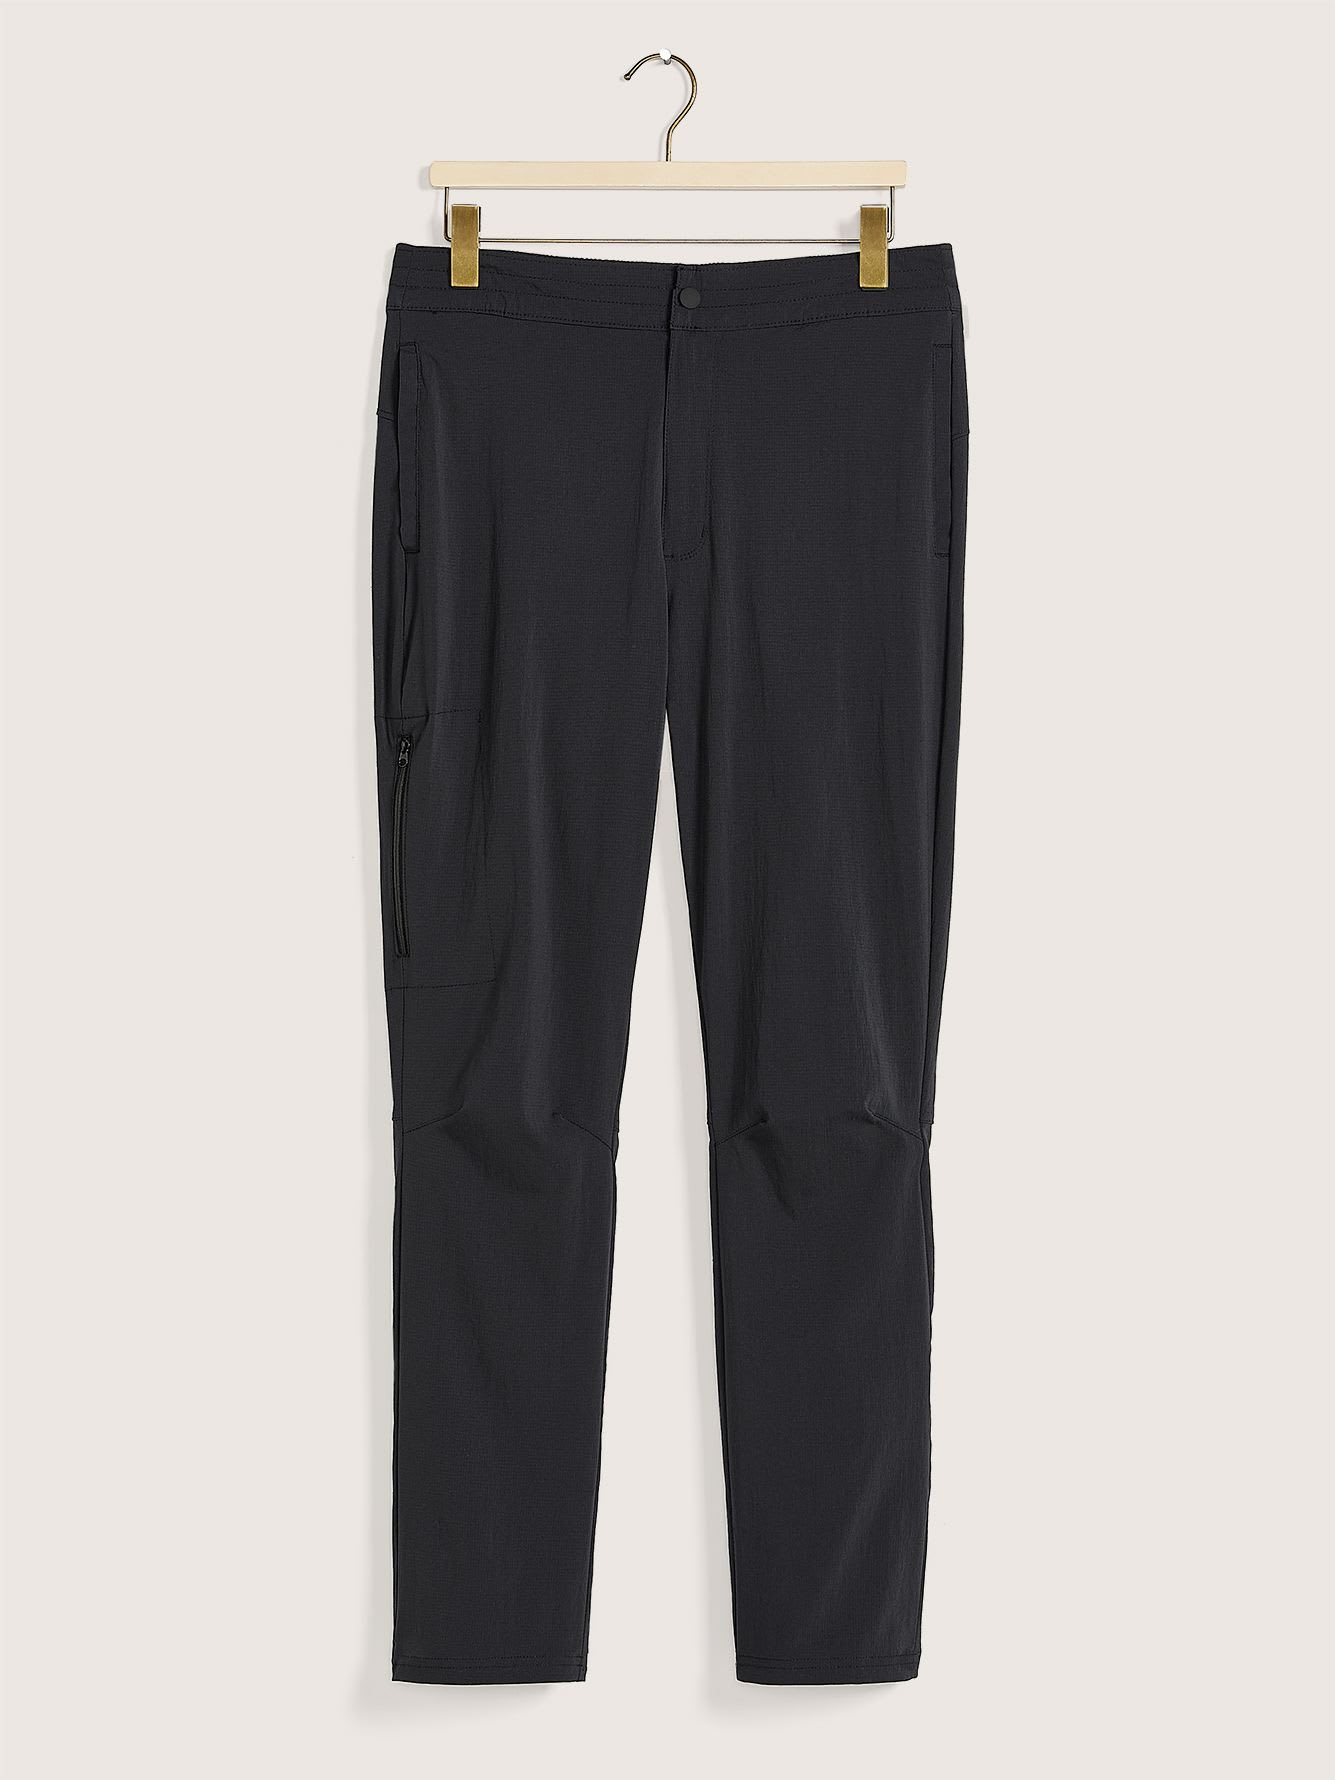 On The Go Pant - Columbia